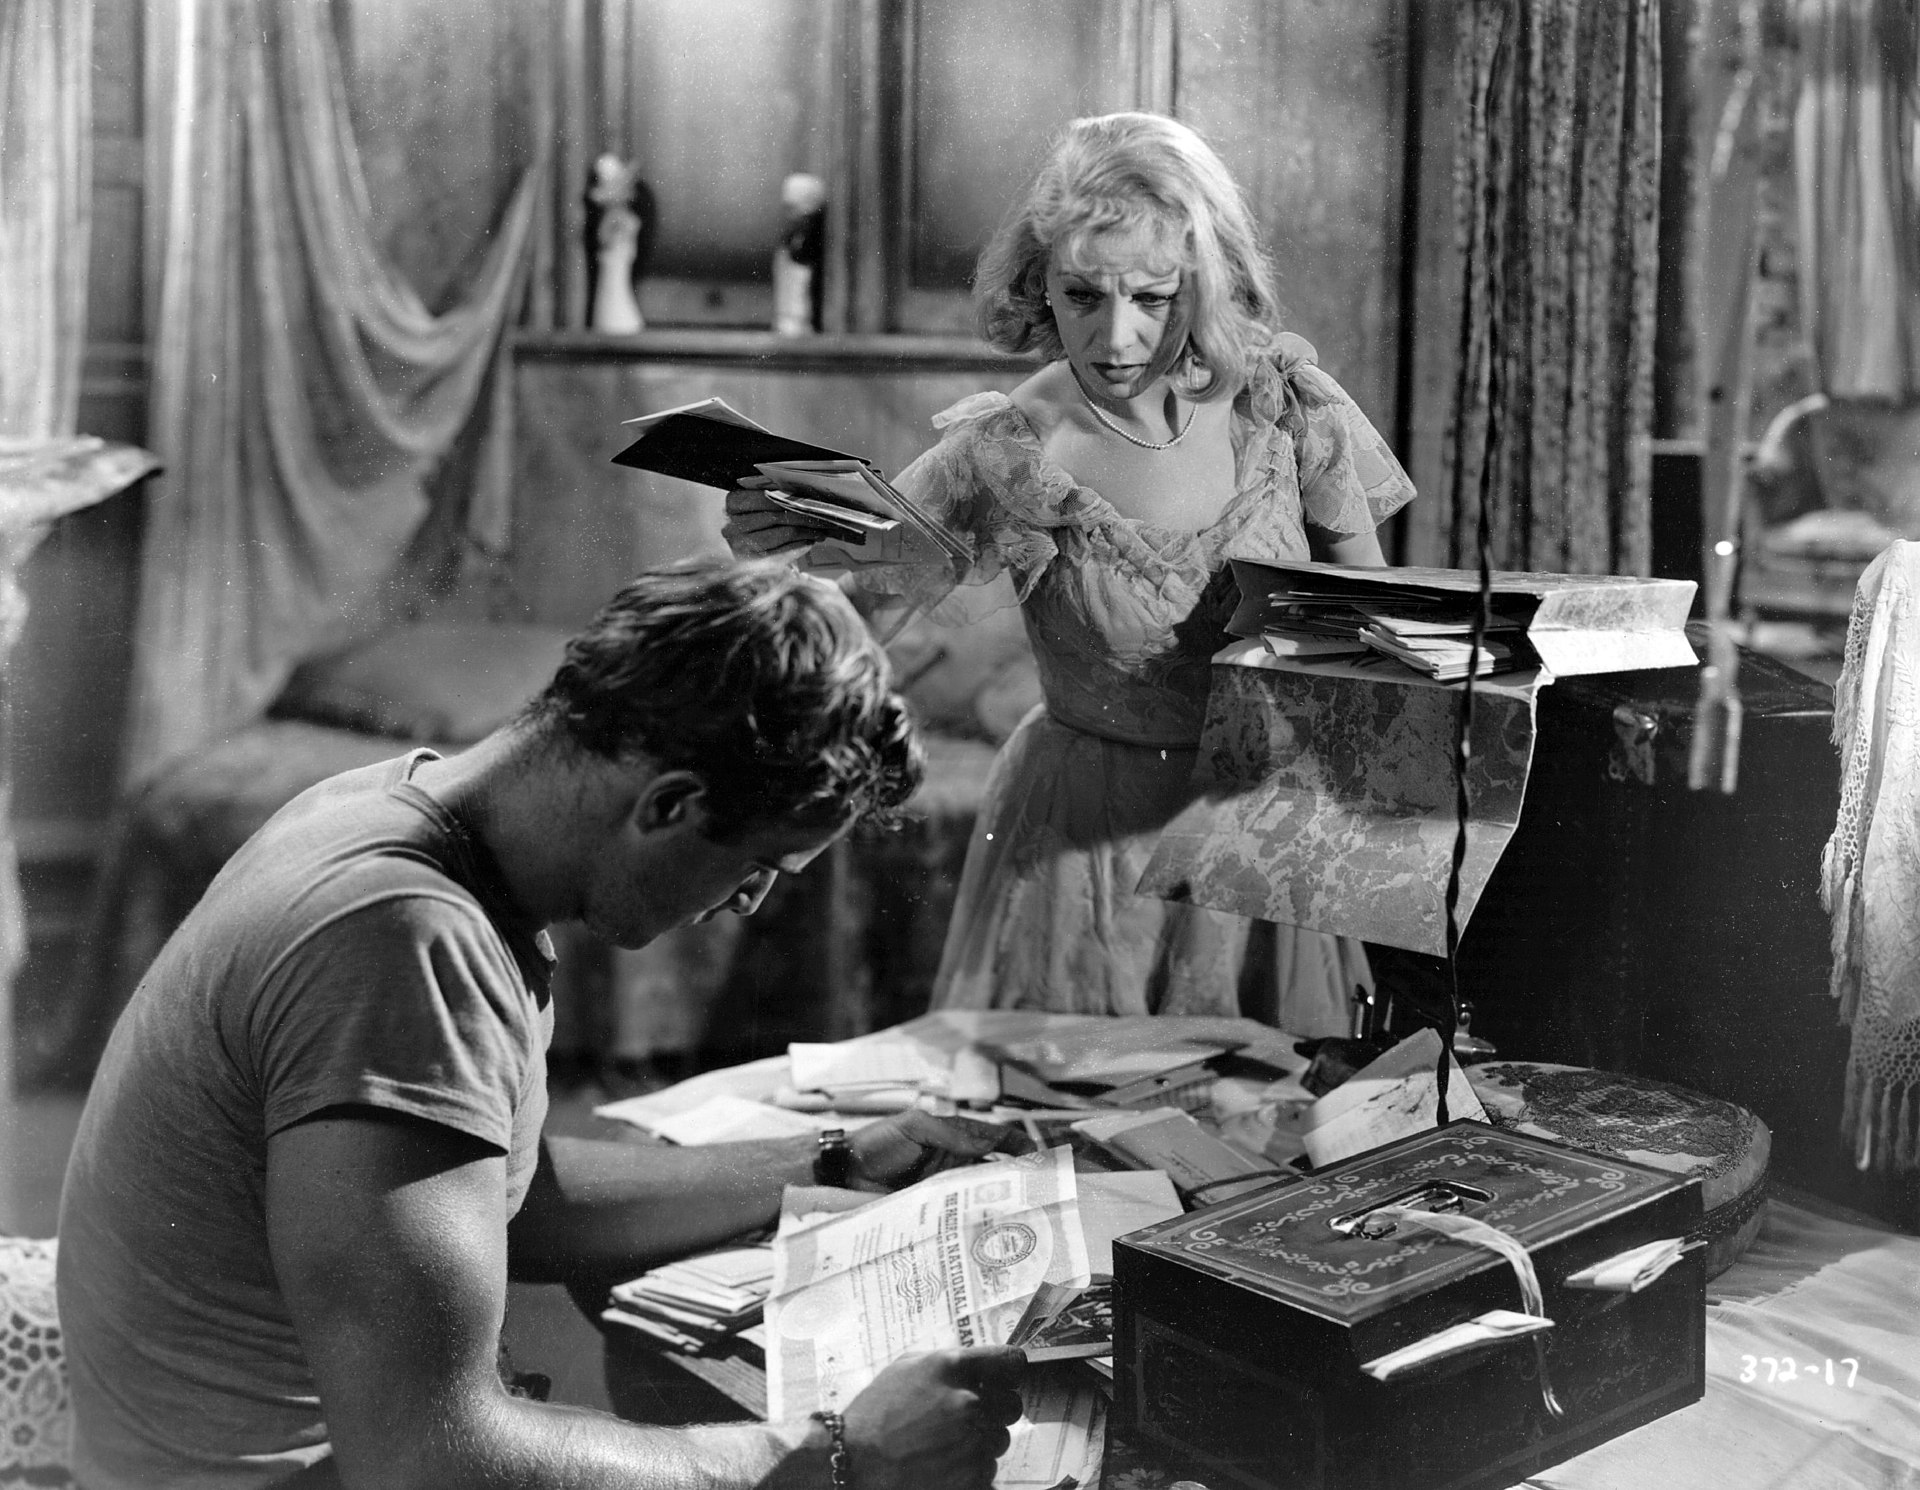 Marlon Brando sits on a desk reading a book while Vivien is talking to him holding a book in her hand.